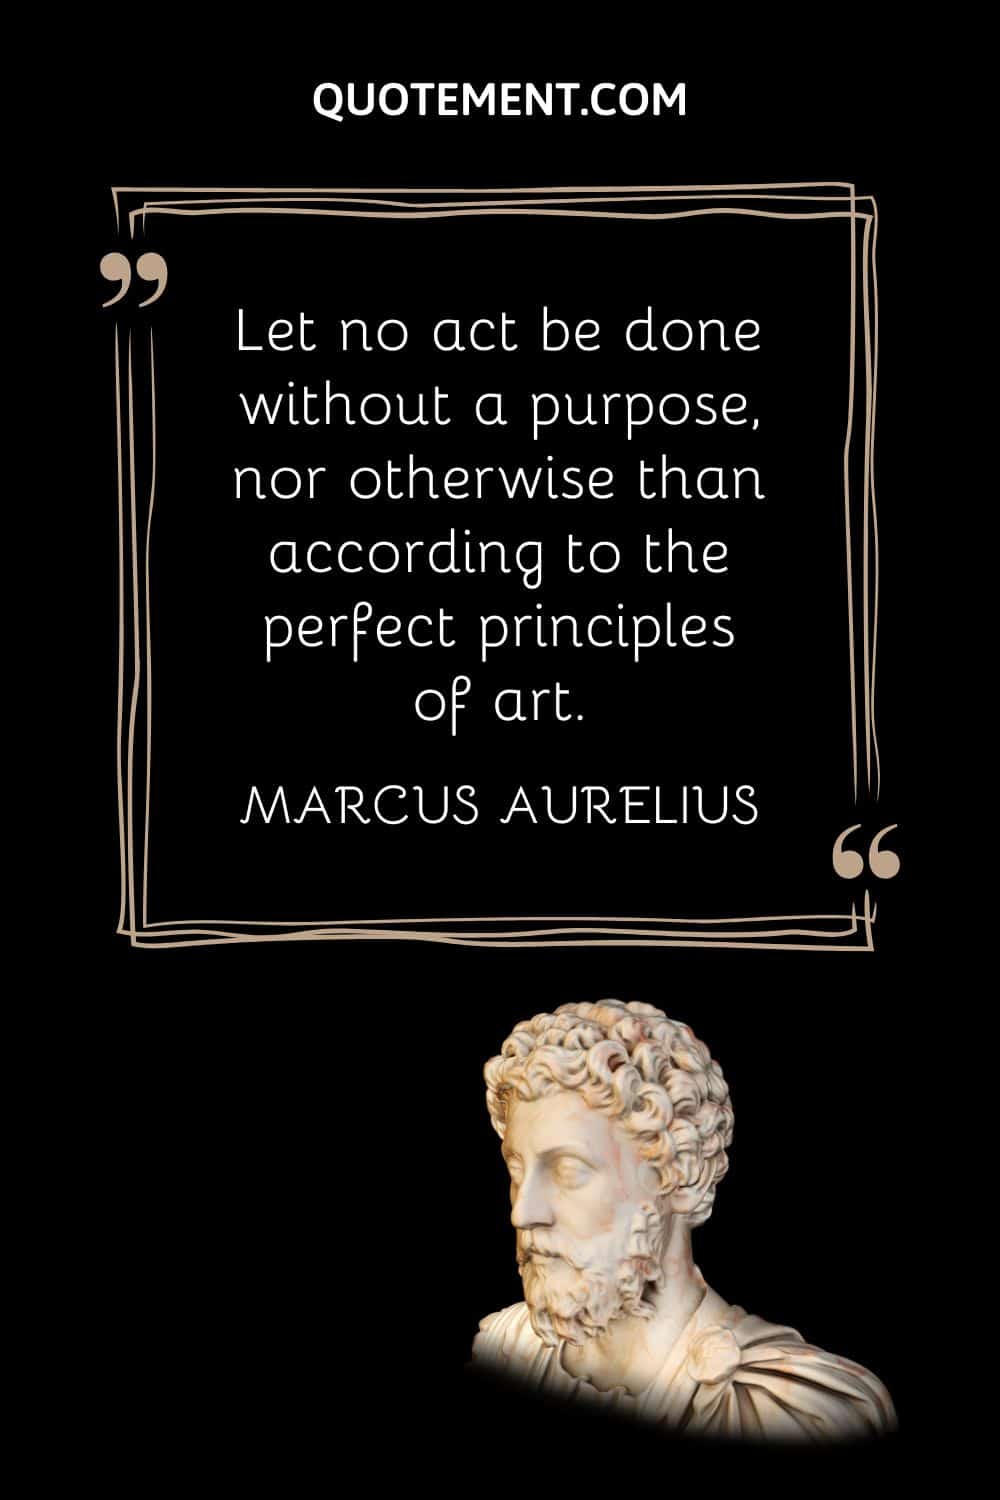 “Let no act be done without a purpose, nor otherwise than according to the perfect principles of art.” — Marcus Aurelius